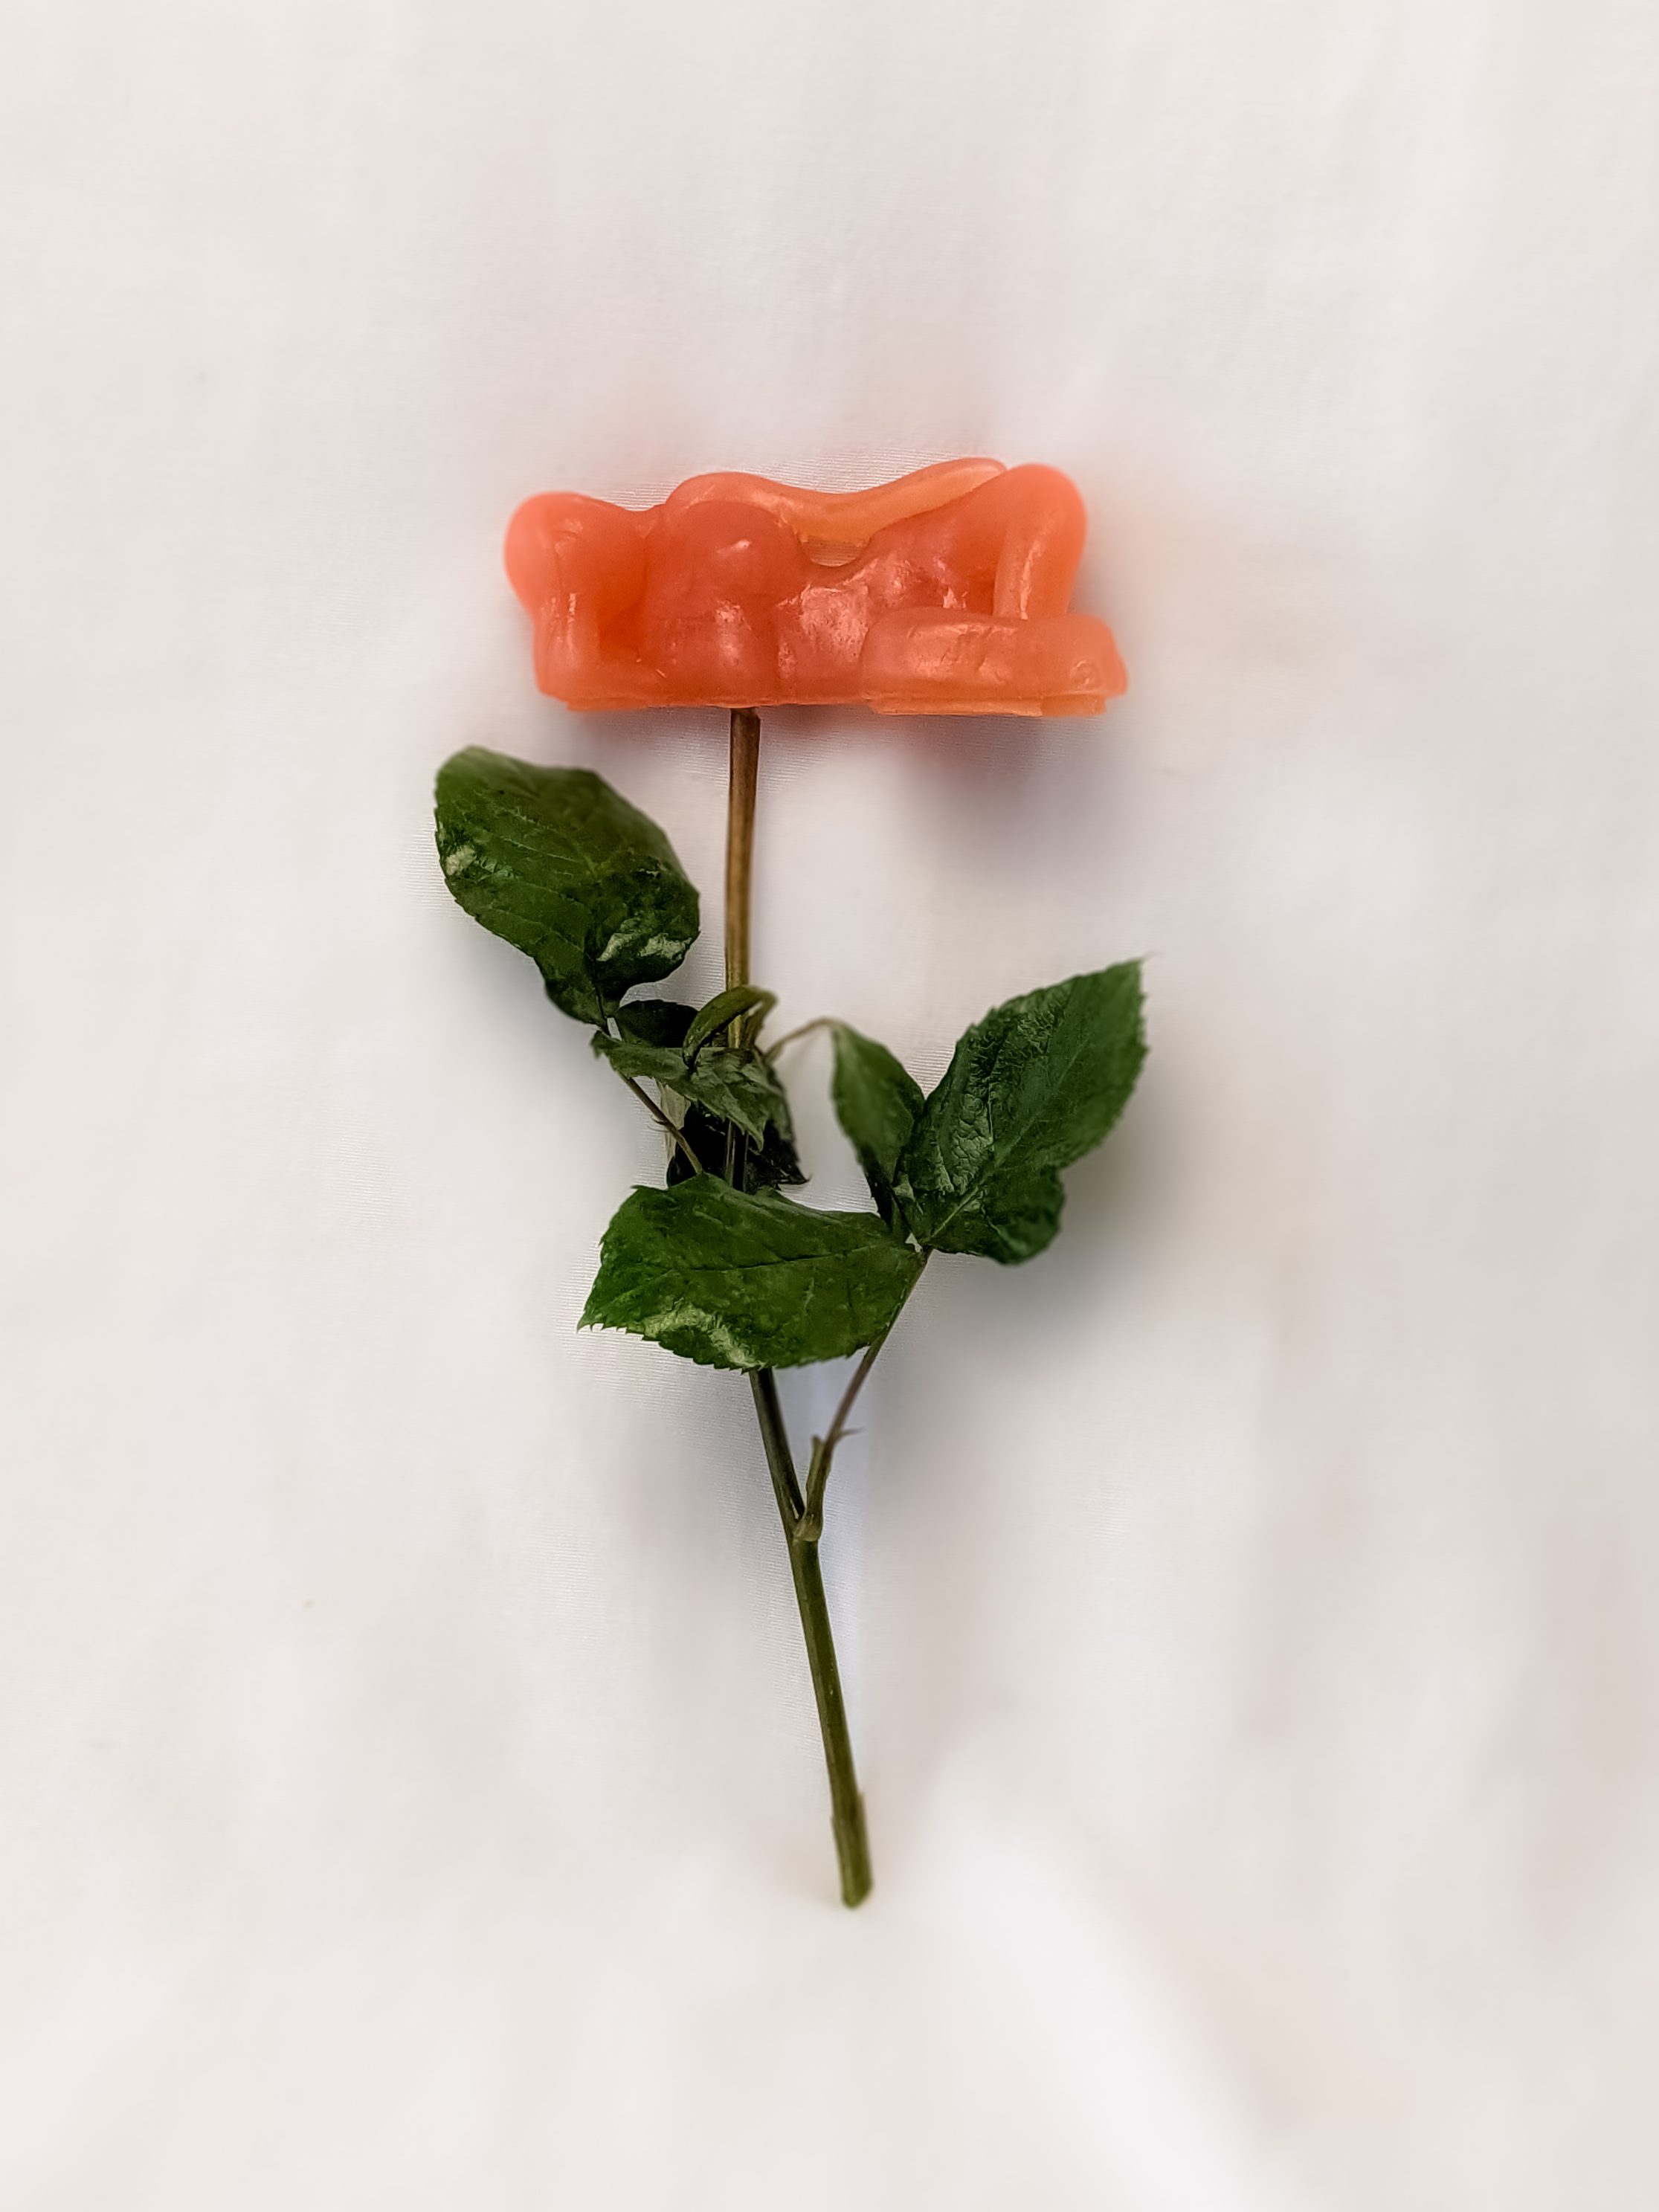 Naked Lady Soap is coming up Roses!